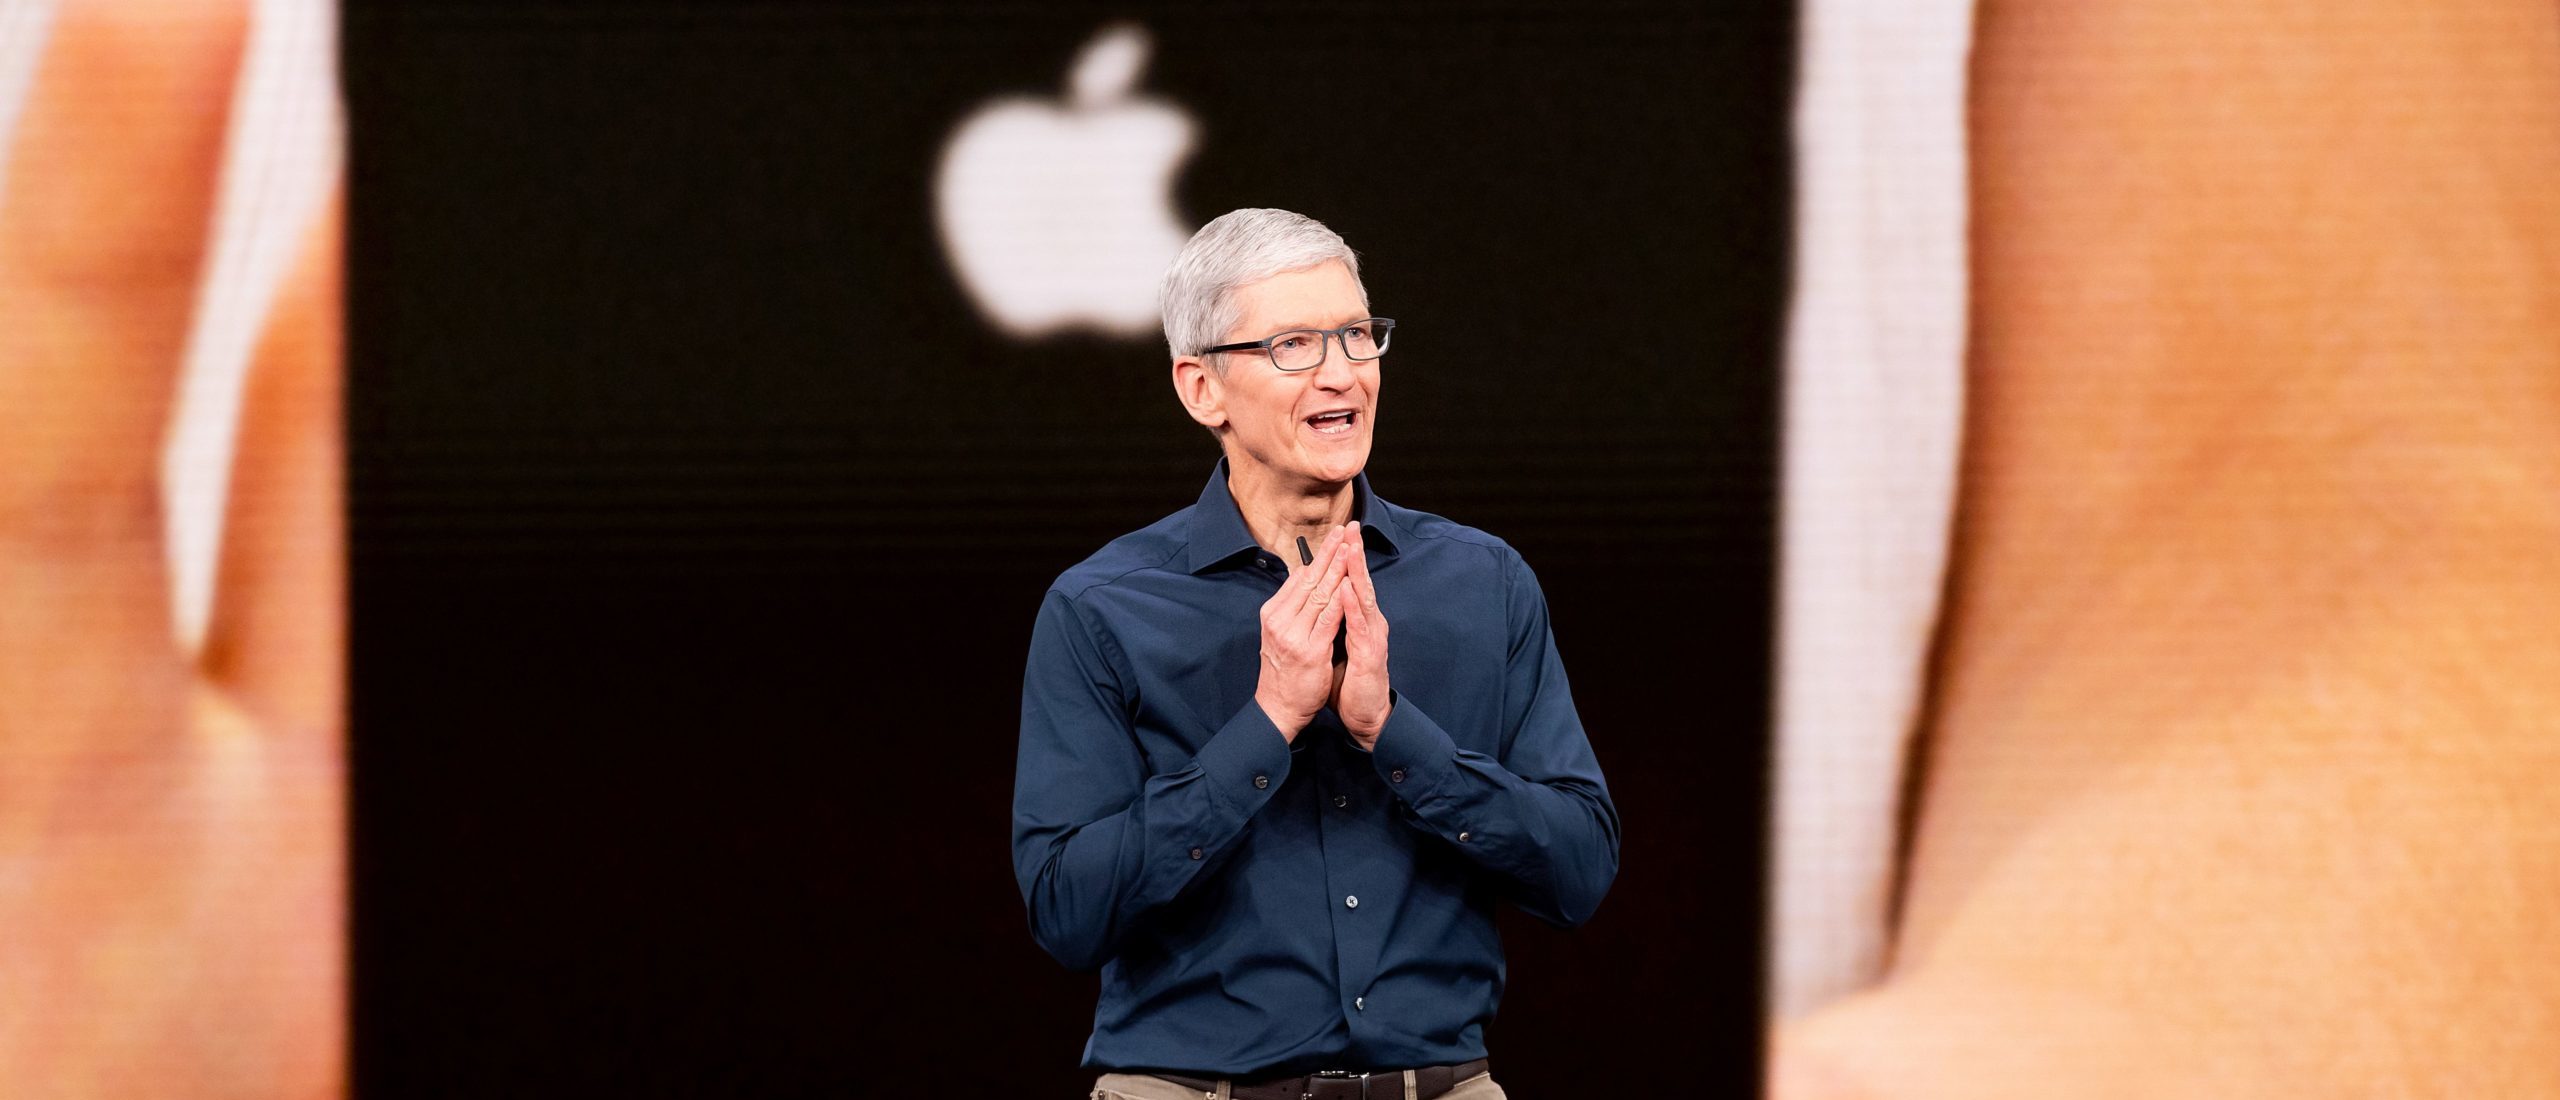 Apple CEO Tim Cook speaks during a product launch event on September 12, 2018, in Cupertino, California. (Photo by NOAH BERGER/AFP via Getty Images)